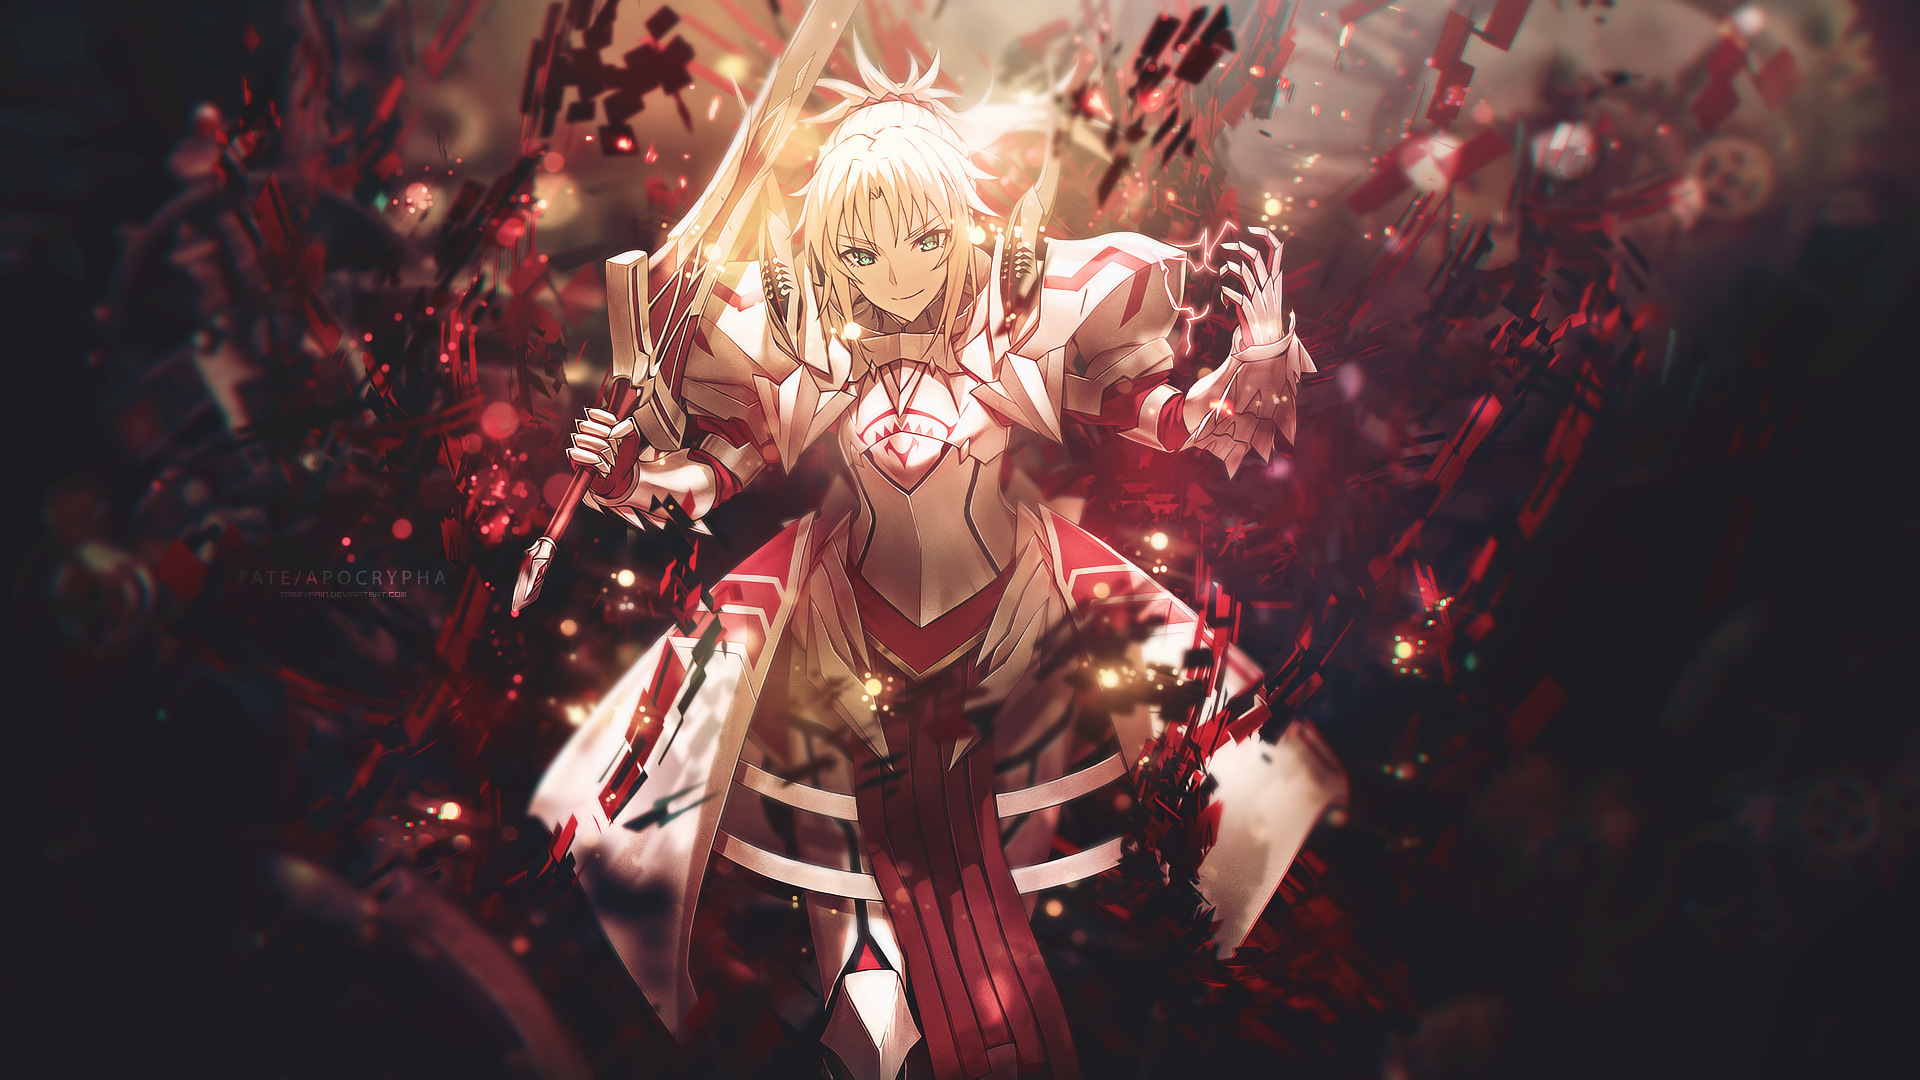 80 Saber Of Red Fate Apocrypha Hd Wallpapers Background Images